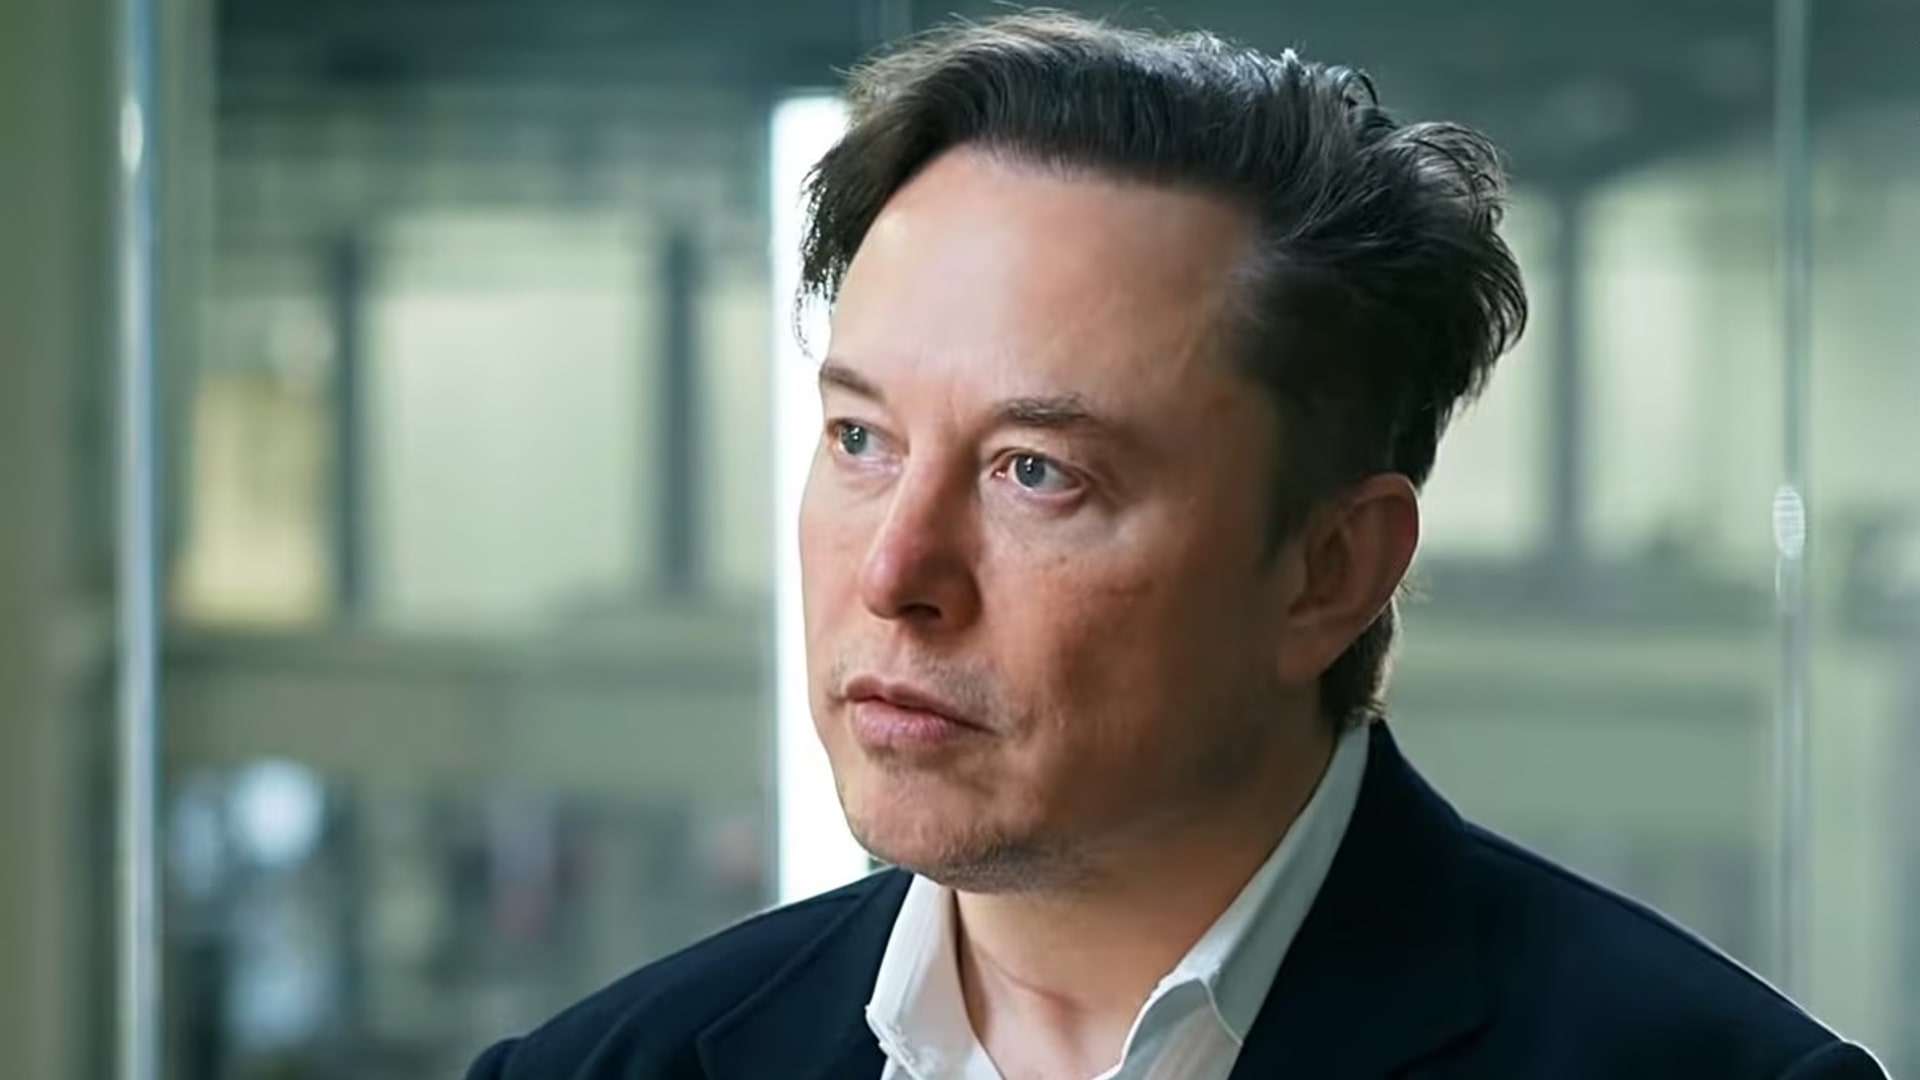 Elon Musk in a interview with TED